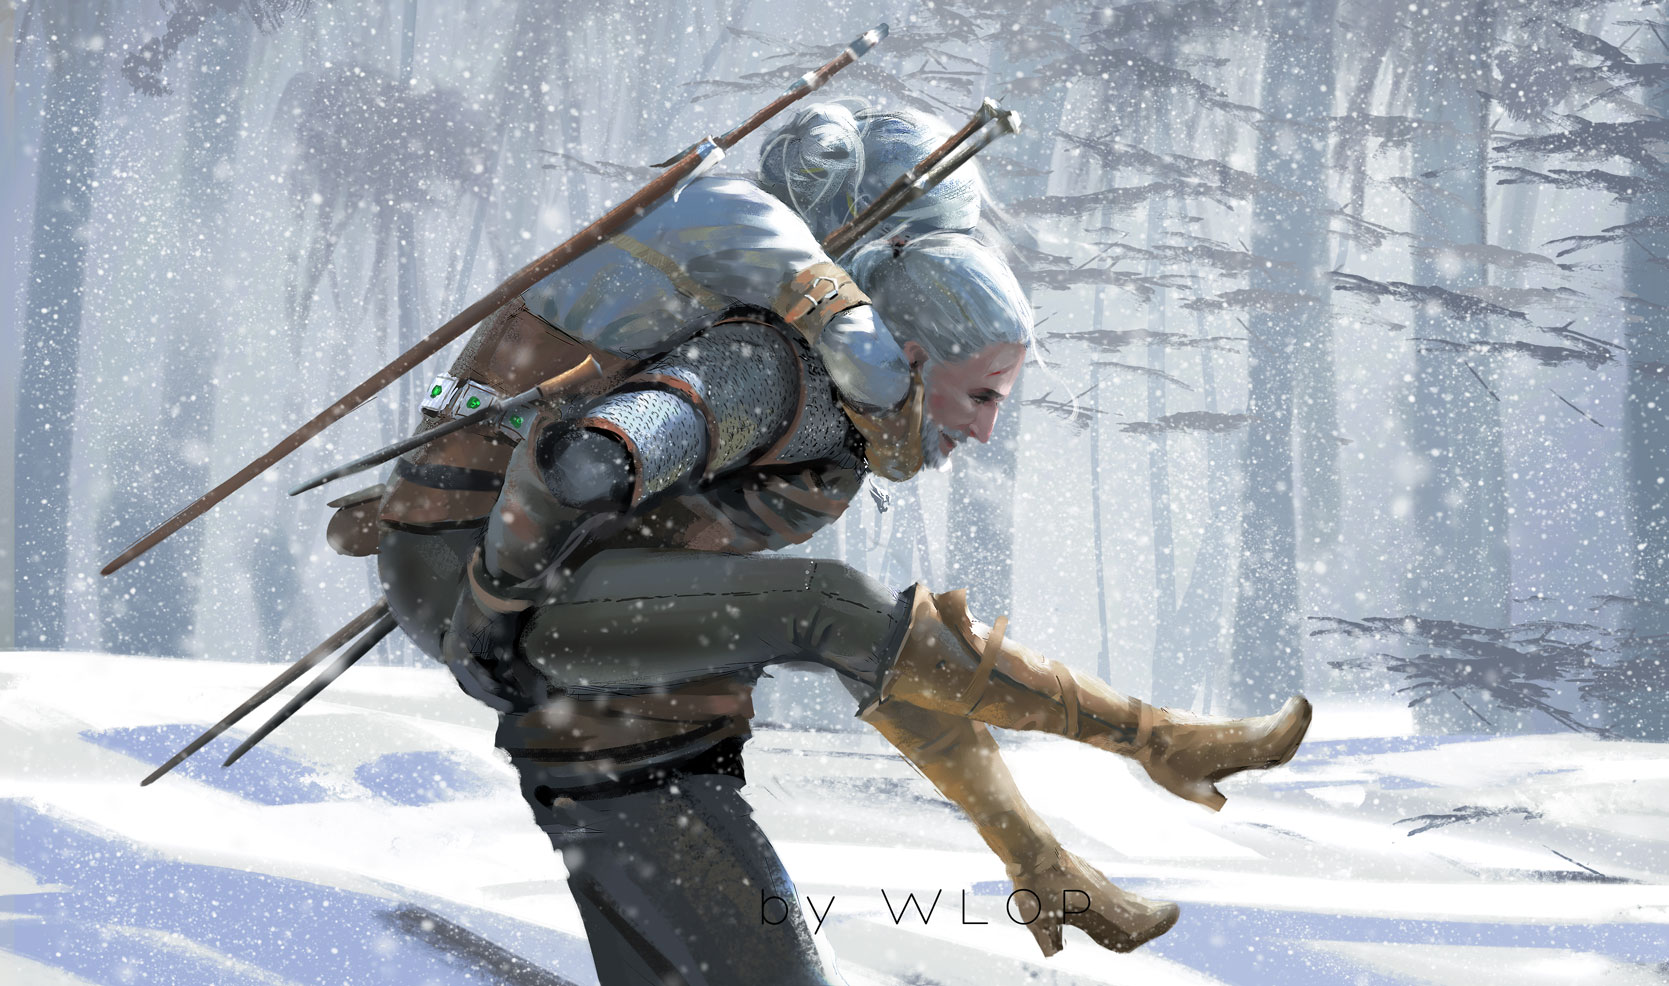 Geralt of Rivia, WLOP, The Witcher 3: Wild Hunt, Cirilla, The Witcher, Girls with swords Wallpaper